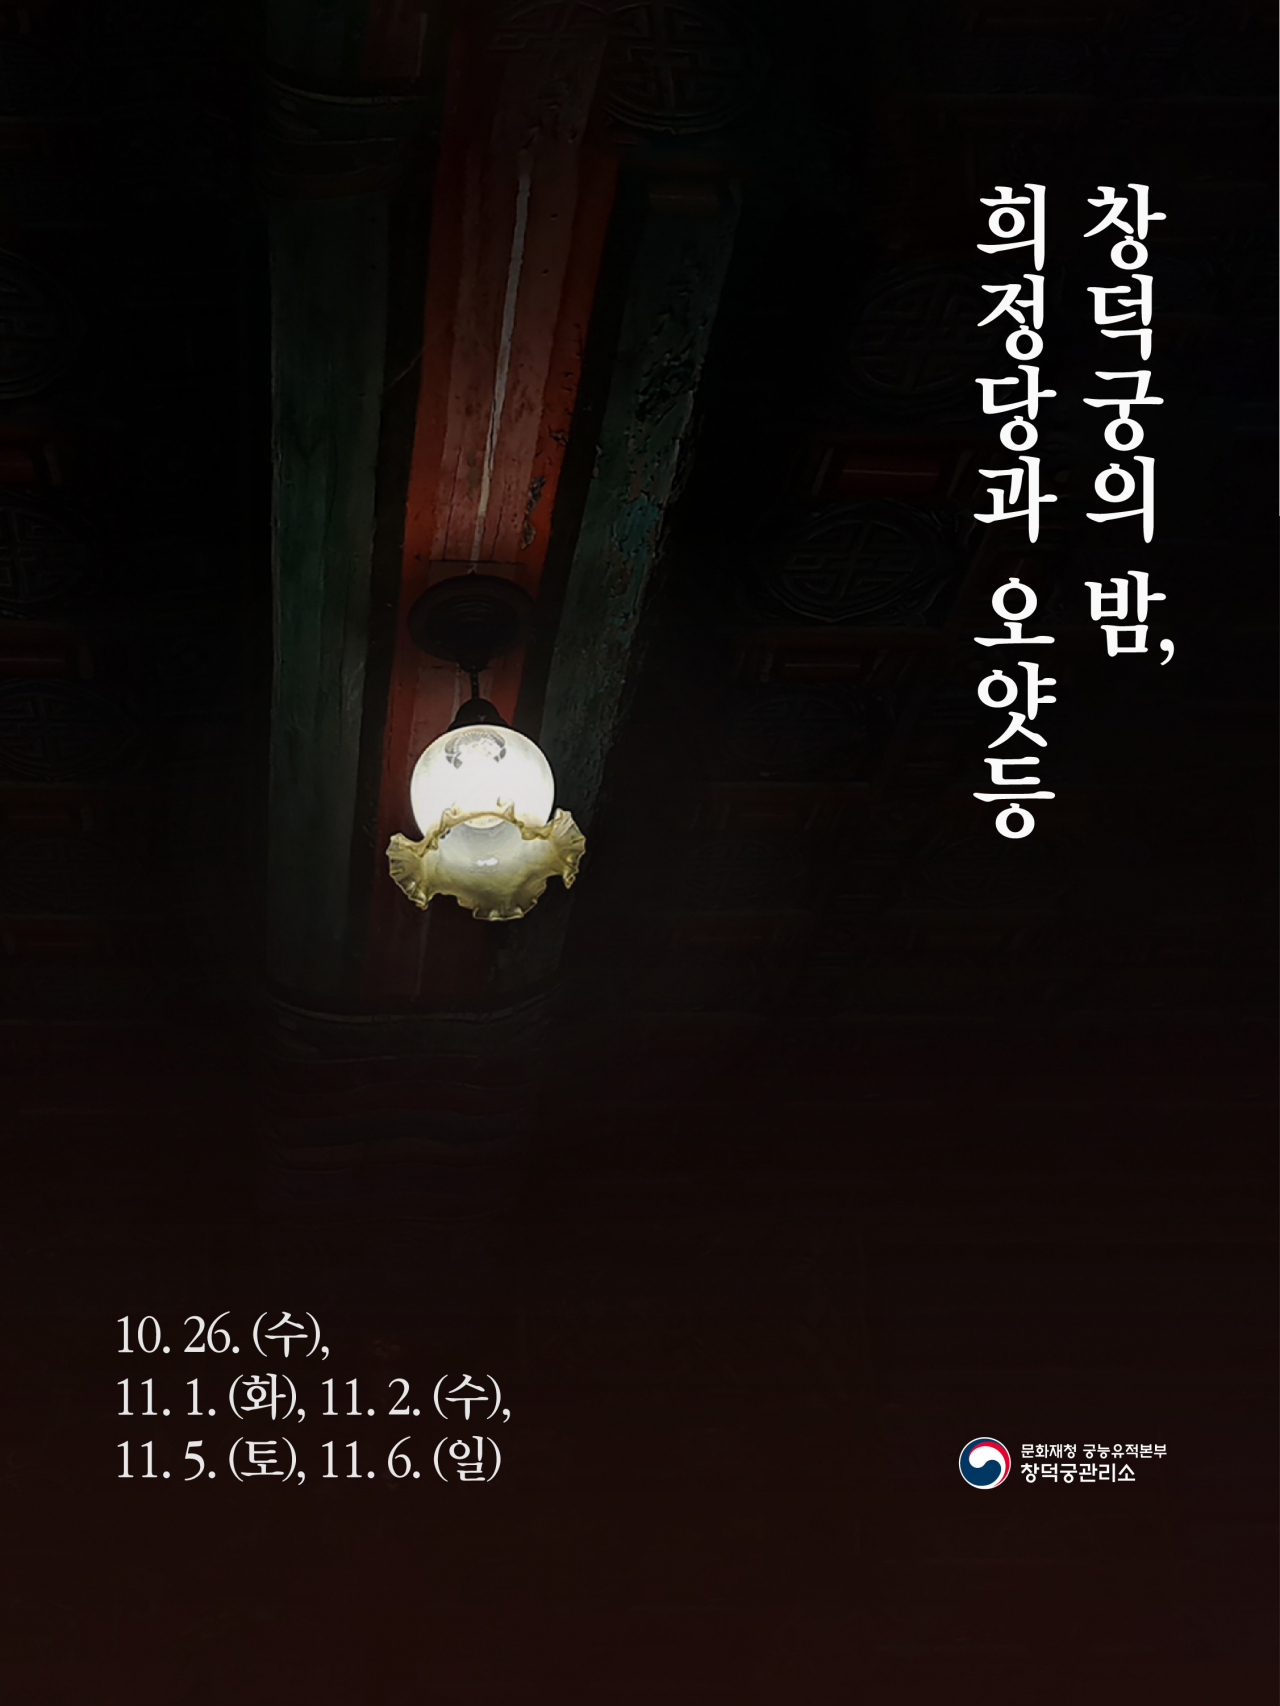 Poster for a nighttime tour at Changdeokgung, featuring a glass lantern with plum blossom seals in gold (CHA)